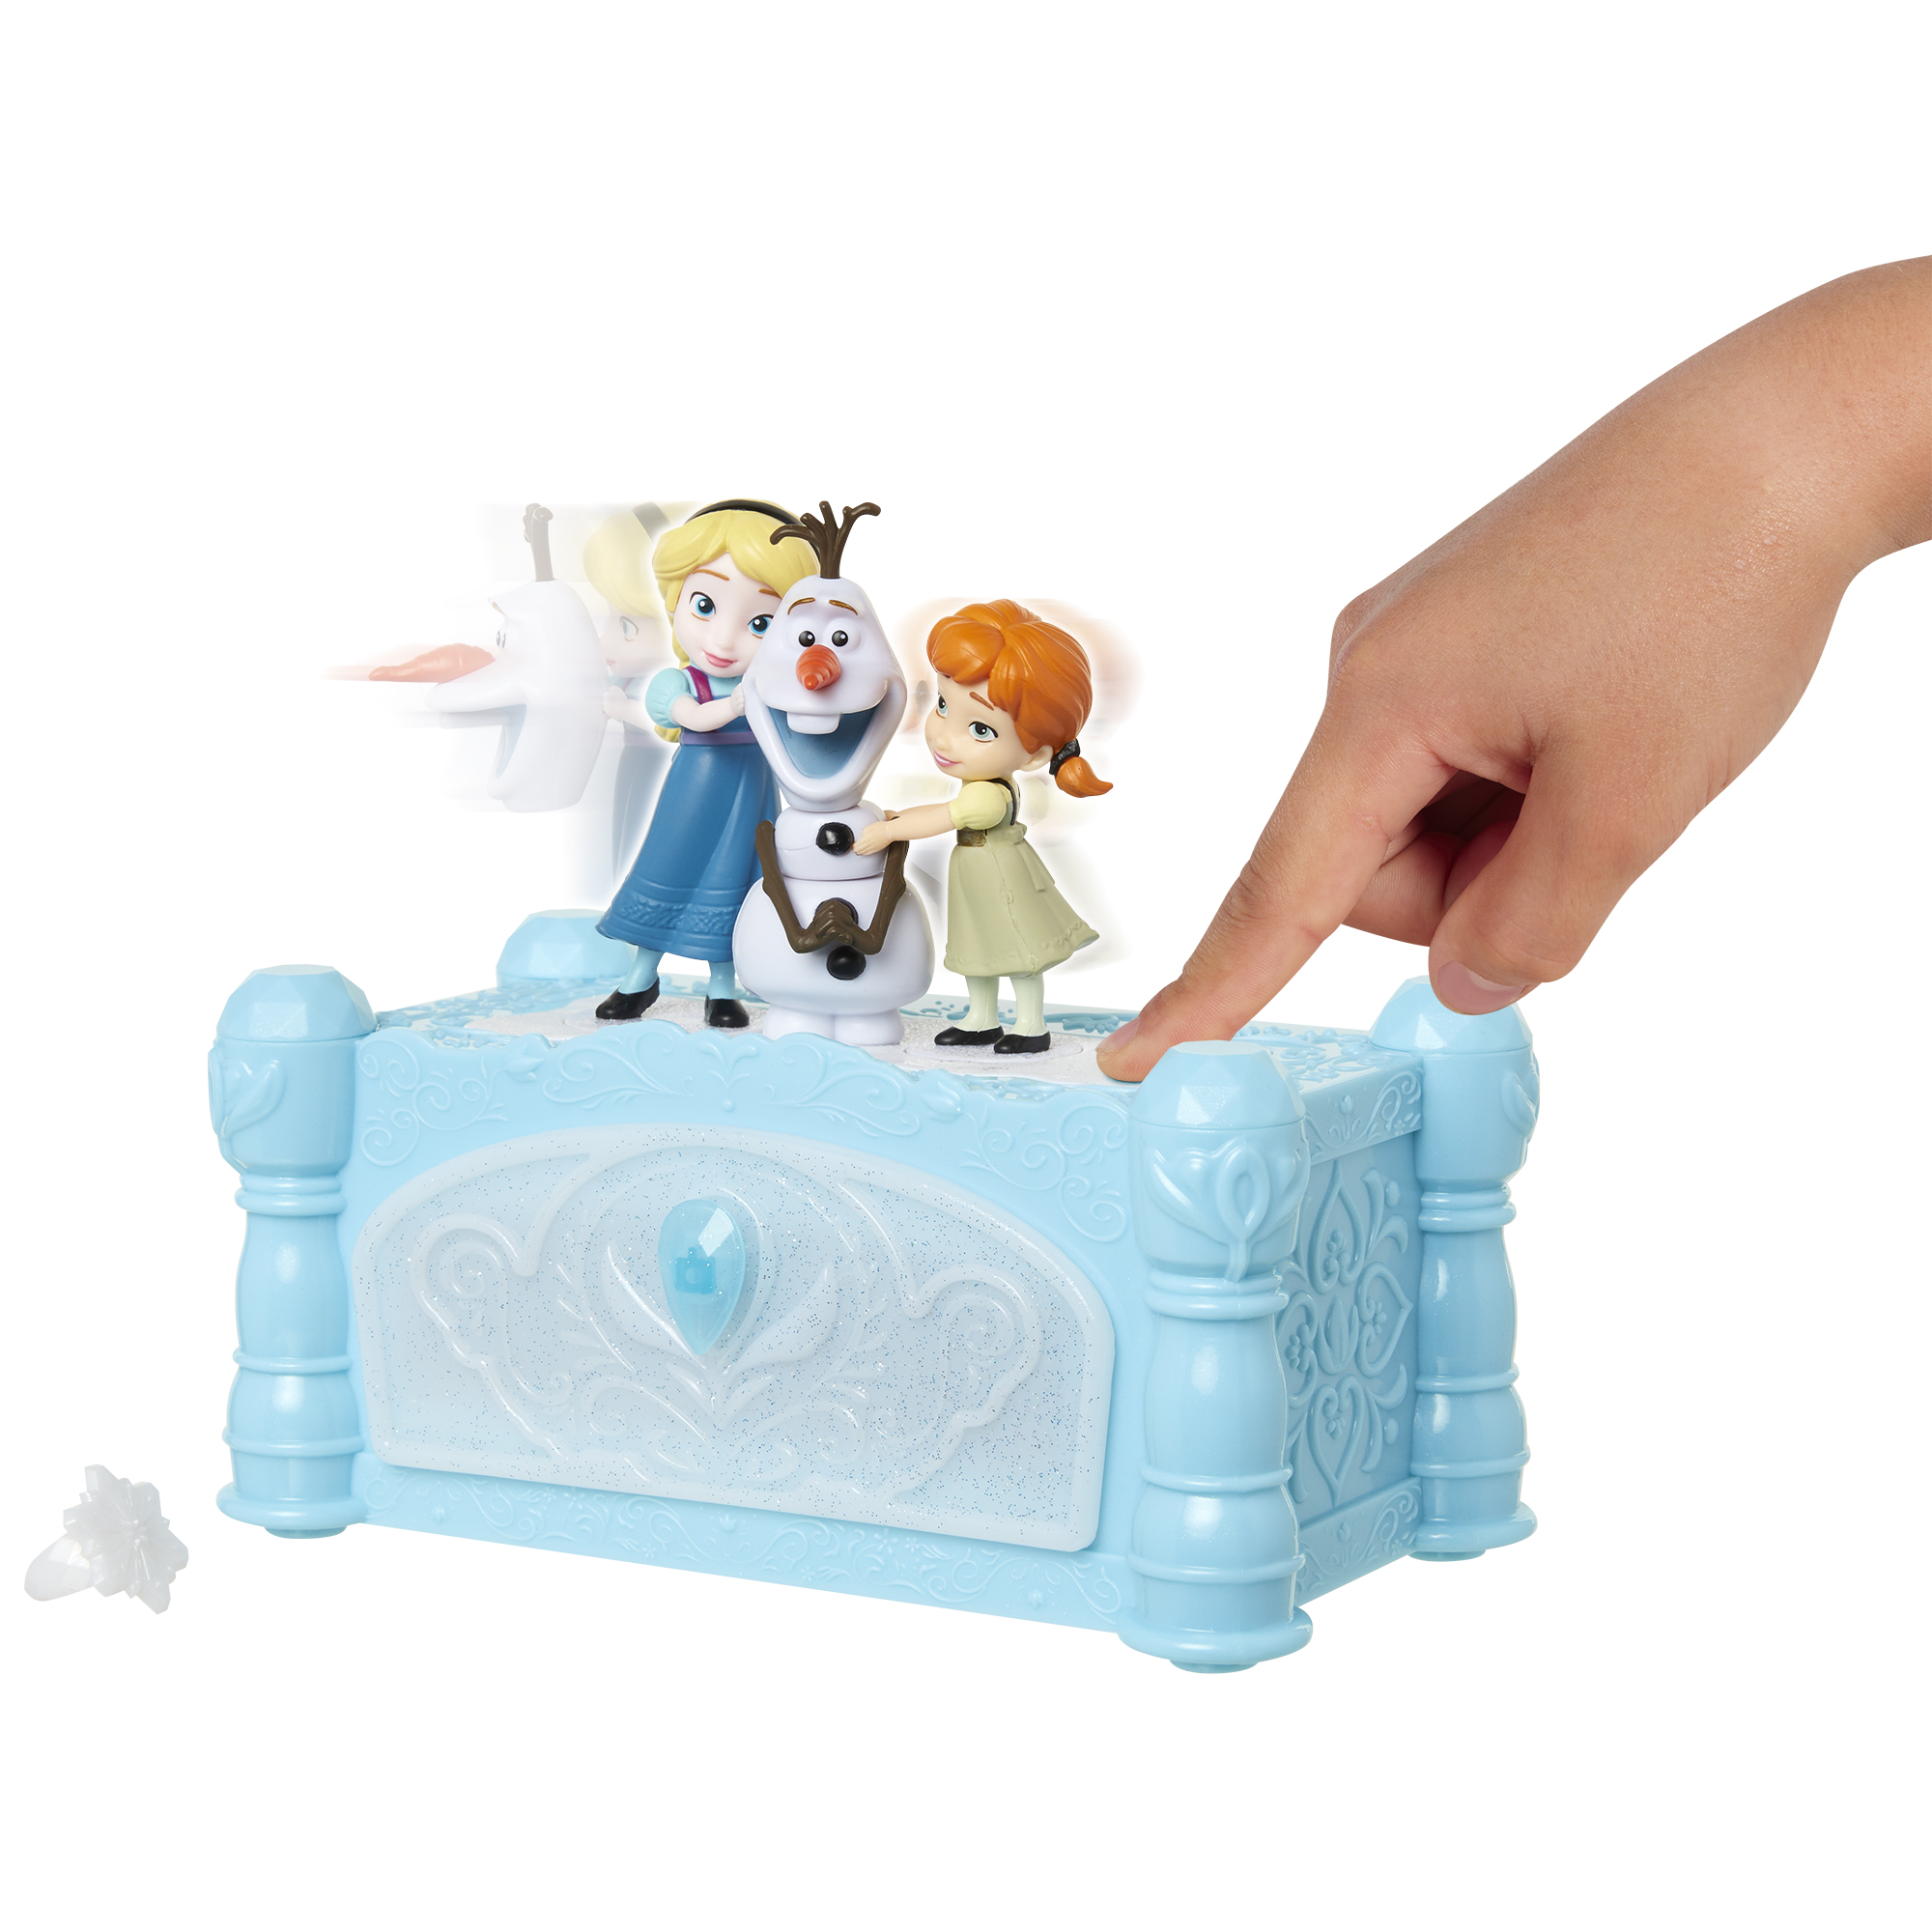 Disney Frozen Do You Want to Build A Snowman 2.0 Jewelry Box - image 2 of 12